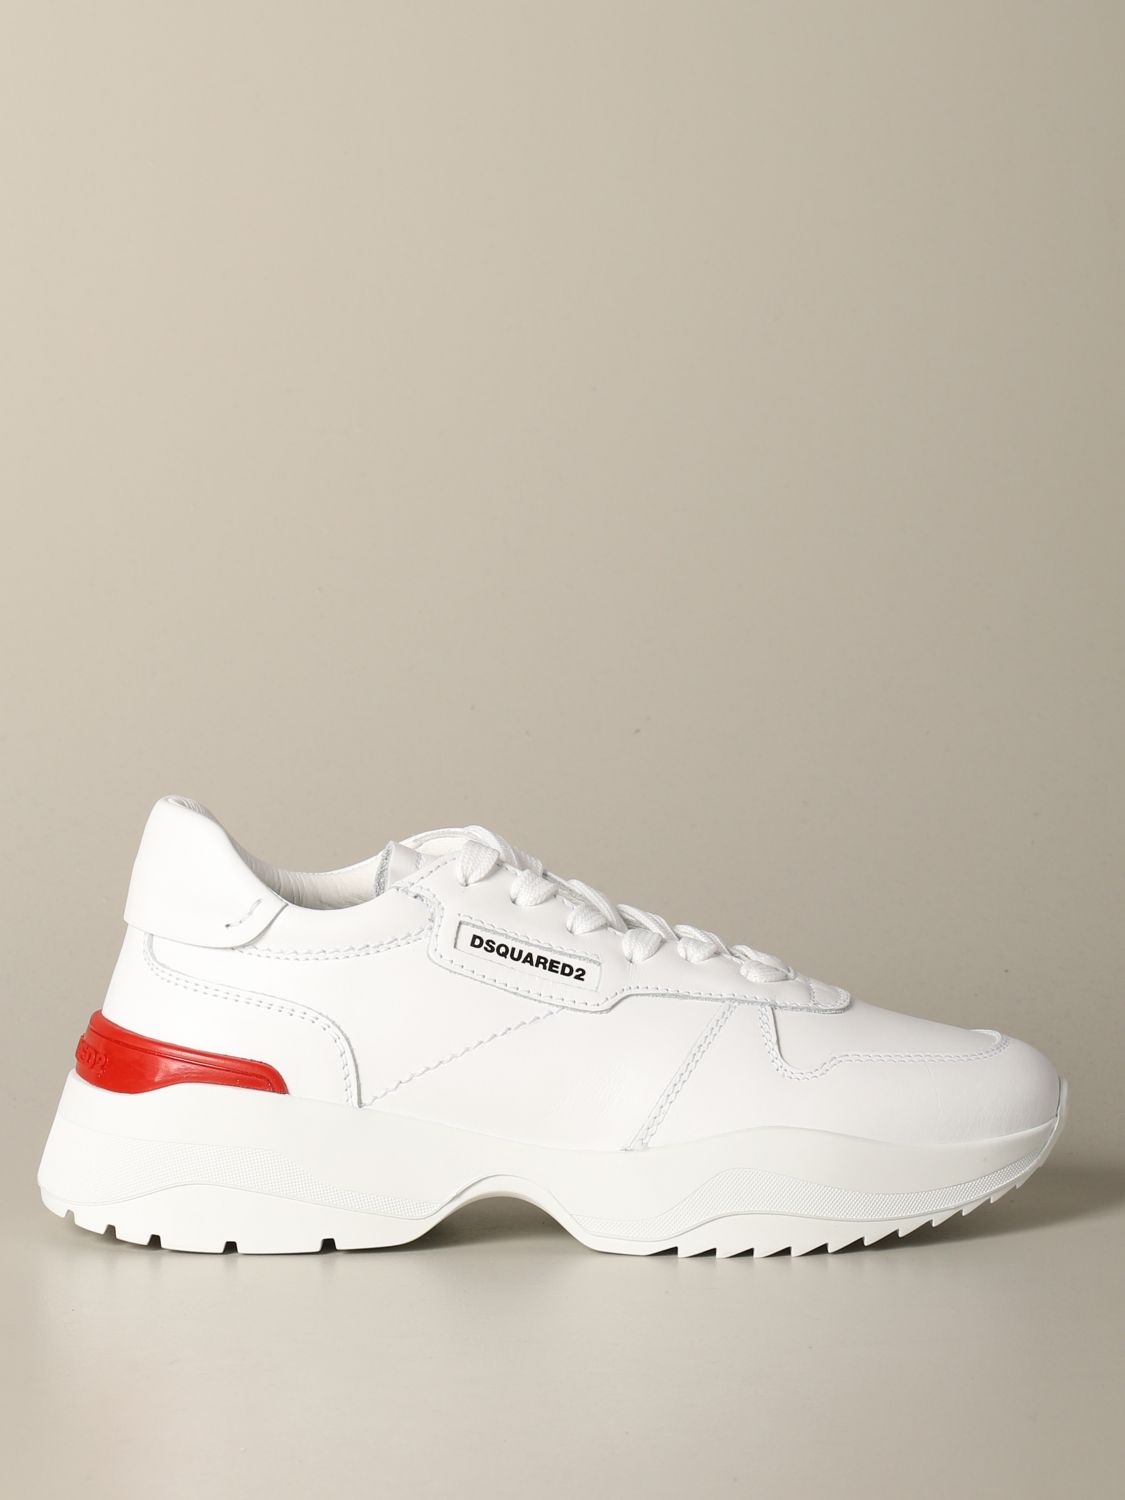 Fragrant Controversy multipurpose Dsquared2 Outlet: leather sneakers with logo - White | Sneakers Dsquared2  SNM009301500001 GIGLIO.COM